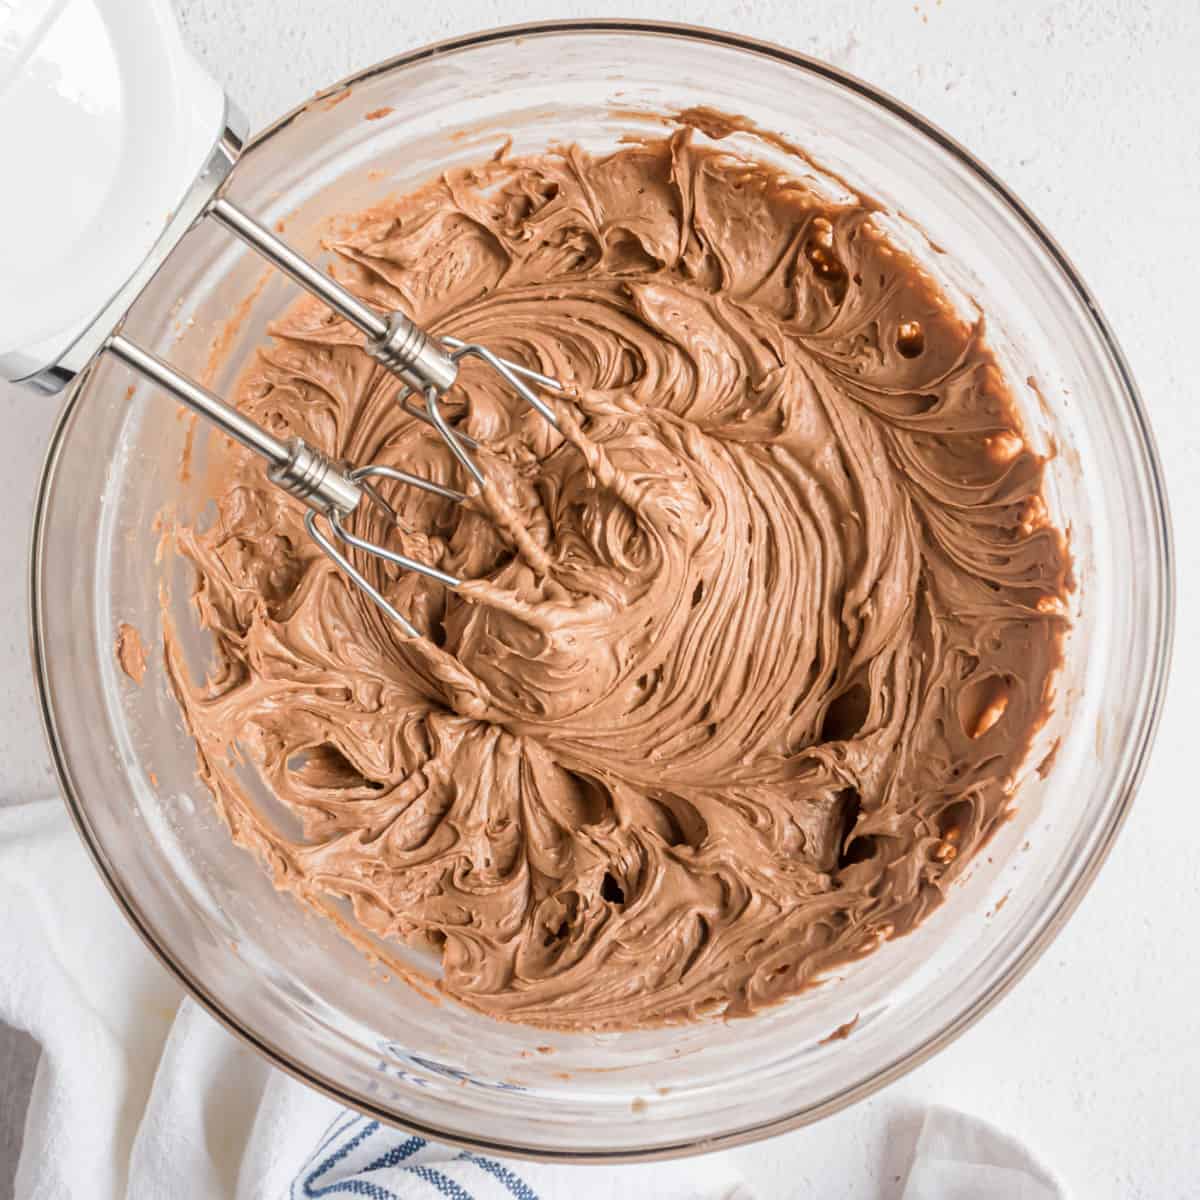 This Chocolate Cream Cheese Frosting is creamy, rich and easy to make. Spread it over sugar cookies or cupcakes for an extra layer of decadence!